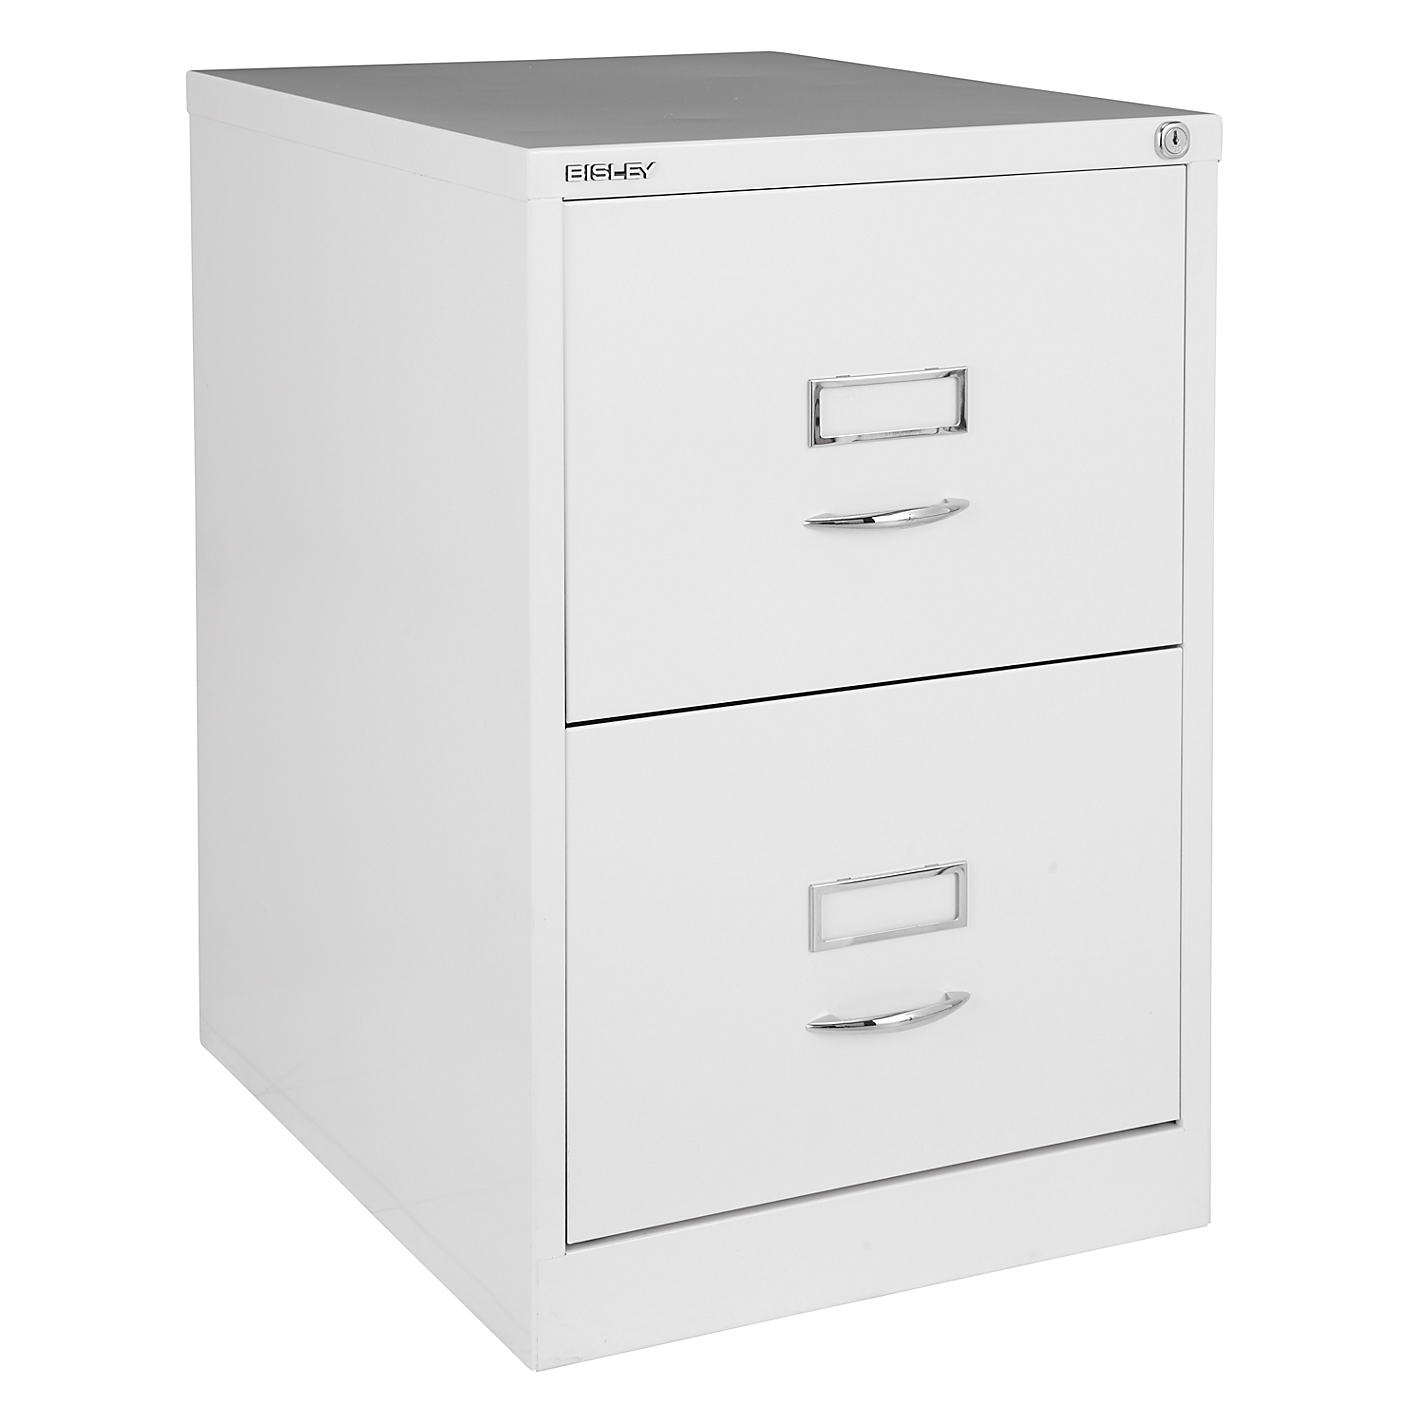 Incredible Small Metal Filing Cabinet Hon Filing Cabinets Old Filing inside proportions 1425 X 1425